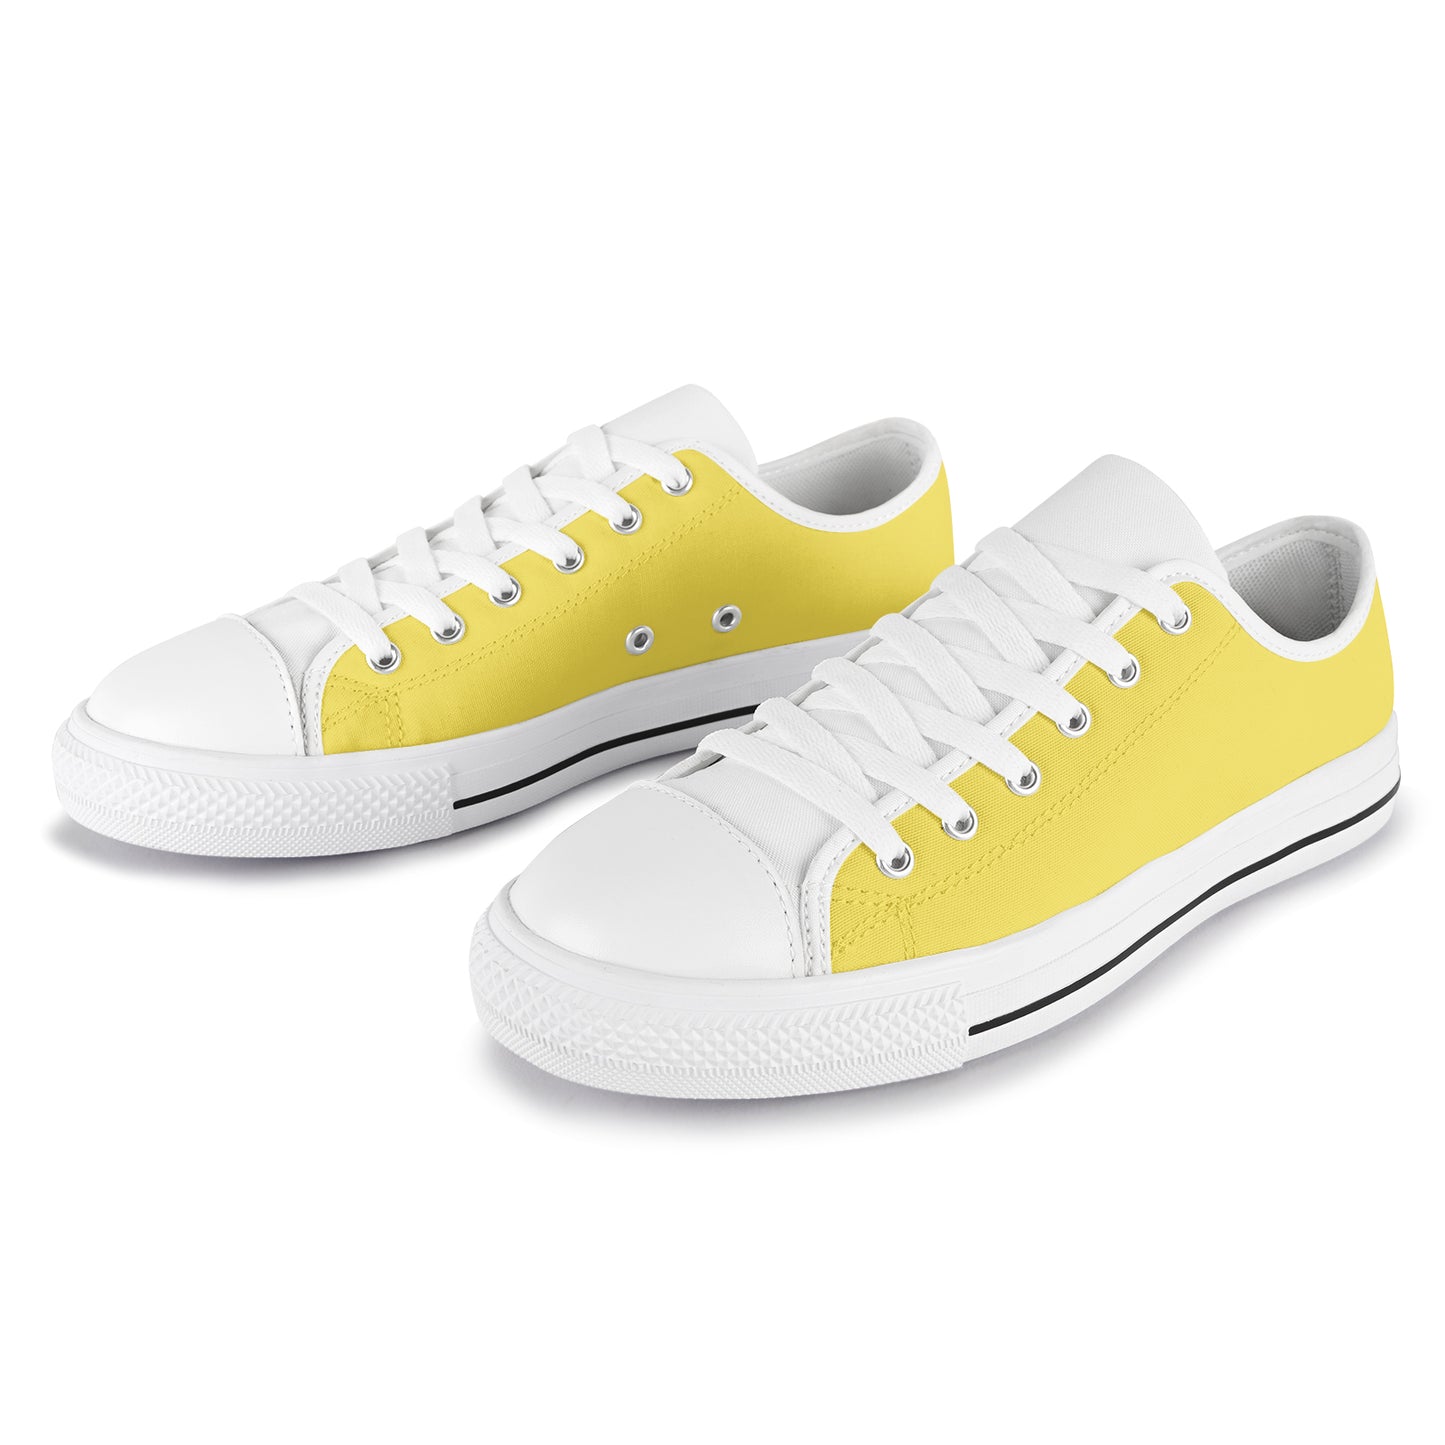 Women's Canvas Sneakers - Classic Yellow